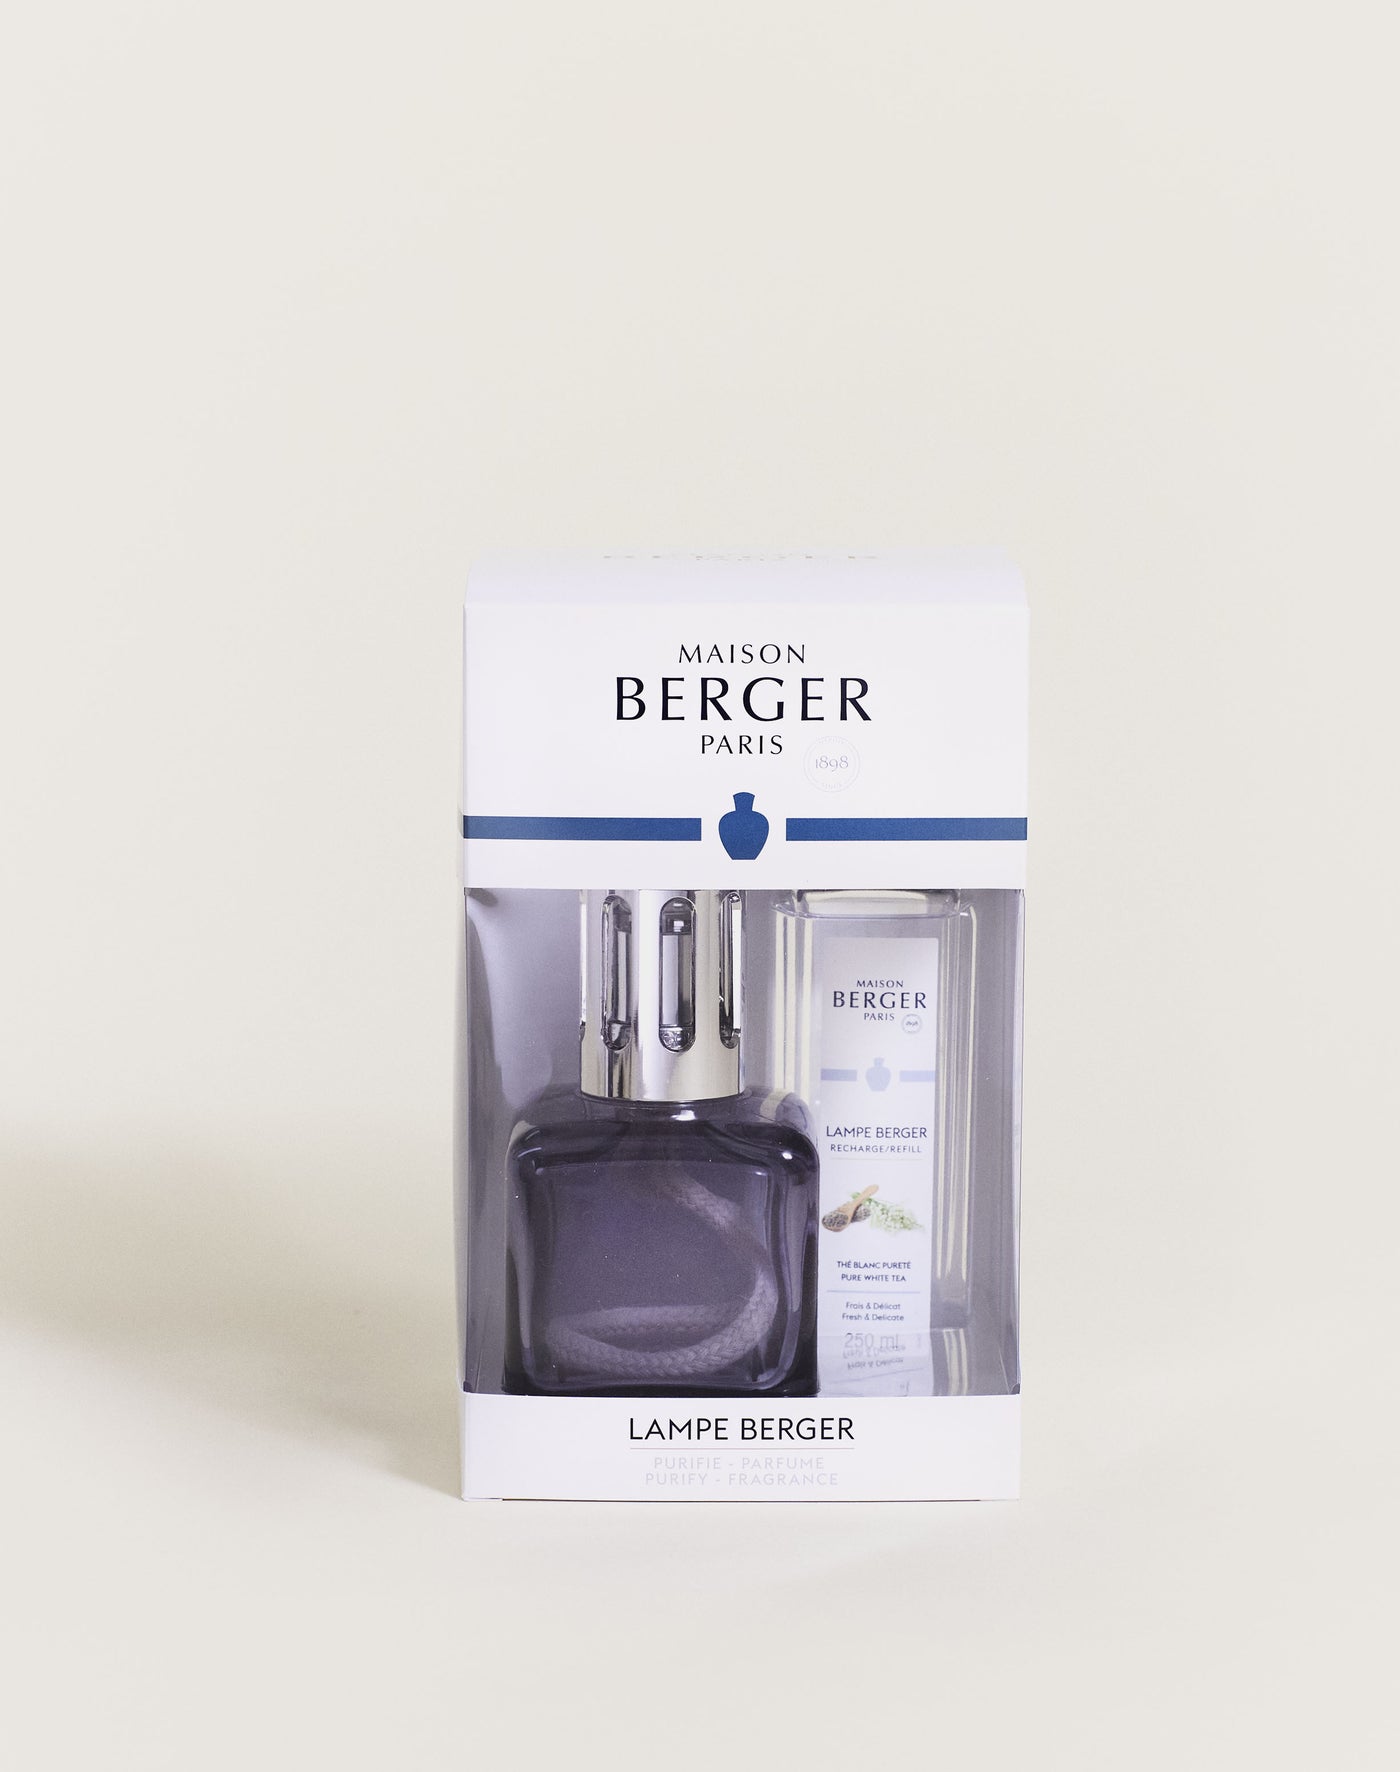 Grey Ice Cube Lamp Berger Gift Pack